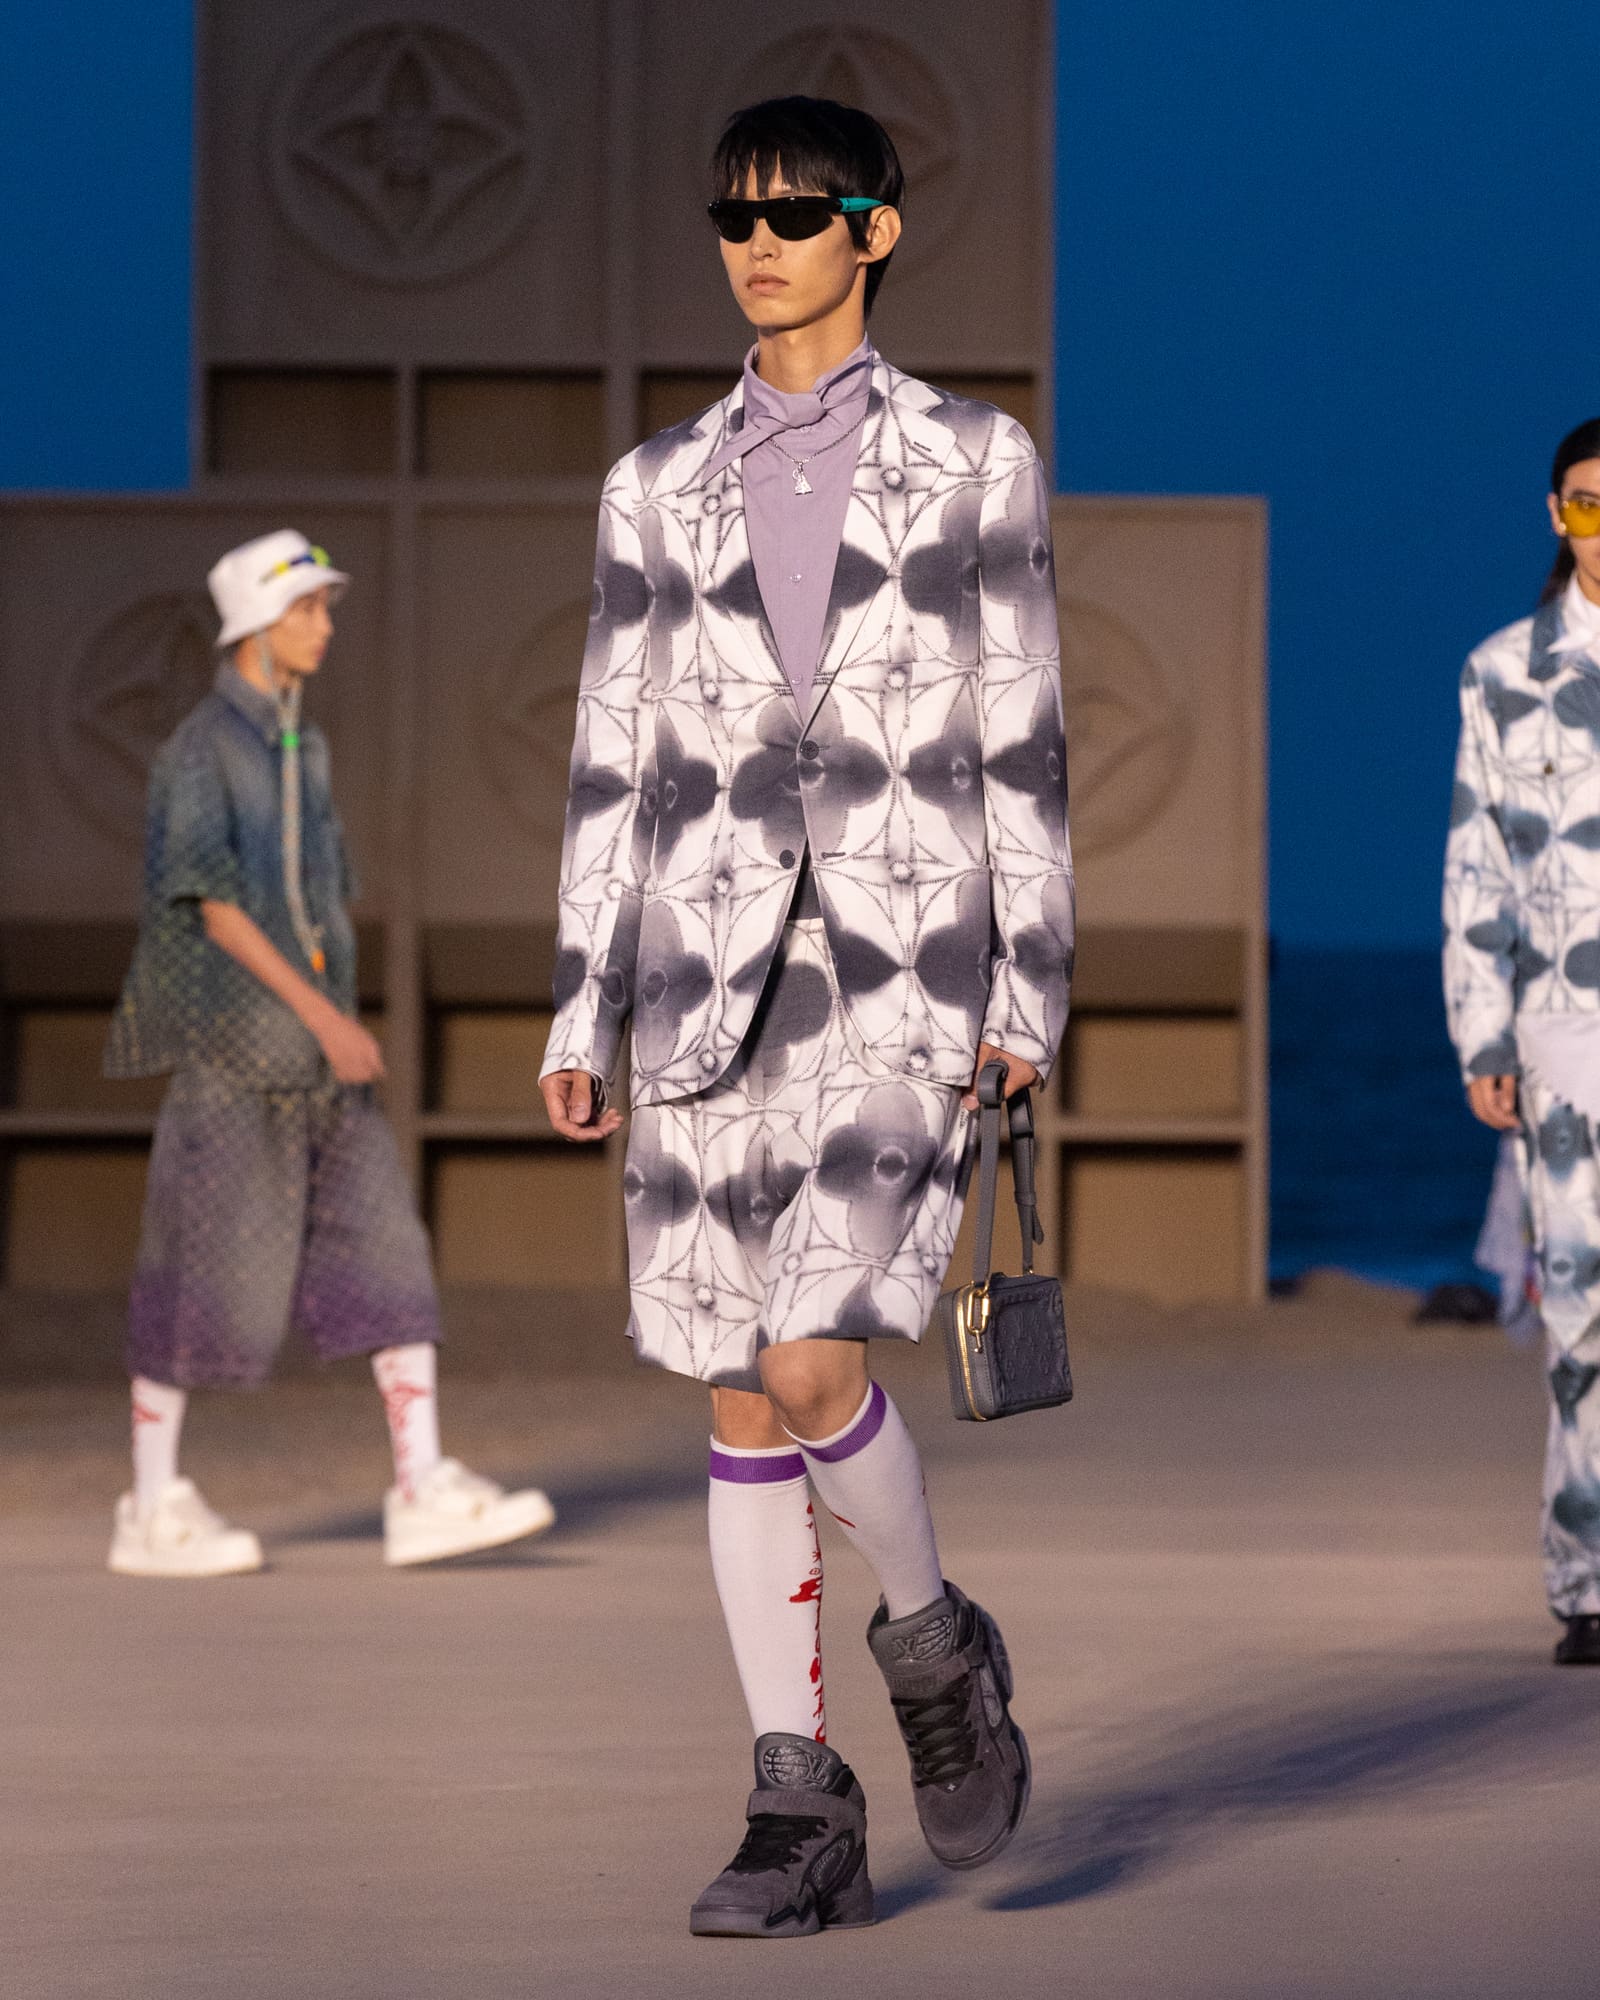 Louis Vuitton Presents its Men's Spring/Summer 2022 Spin-off